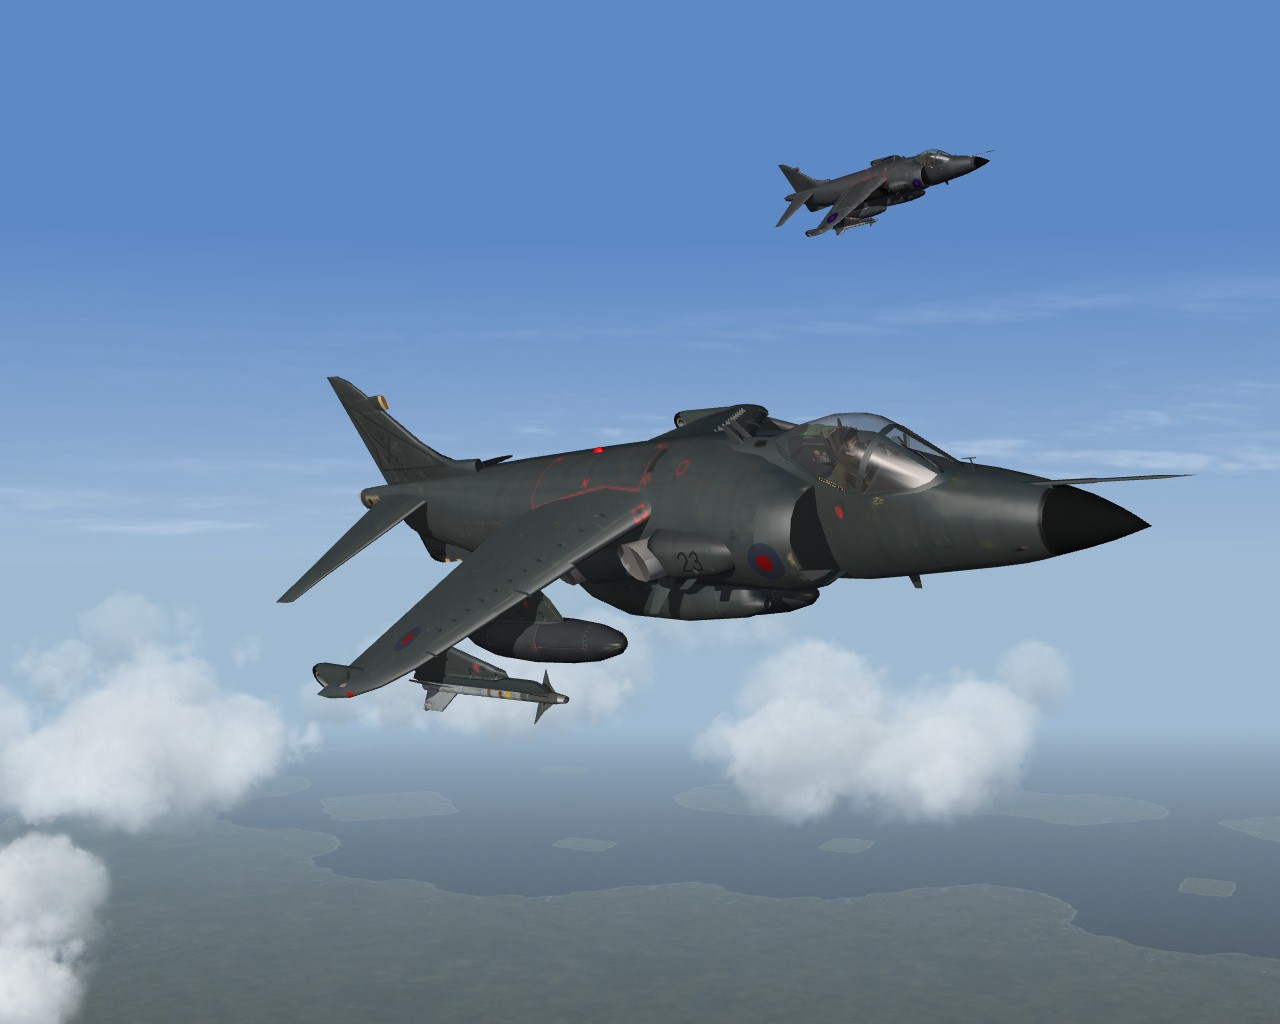 Harriers over the Falklands